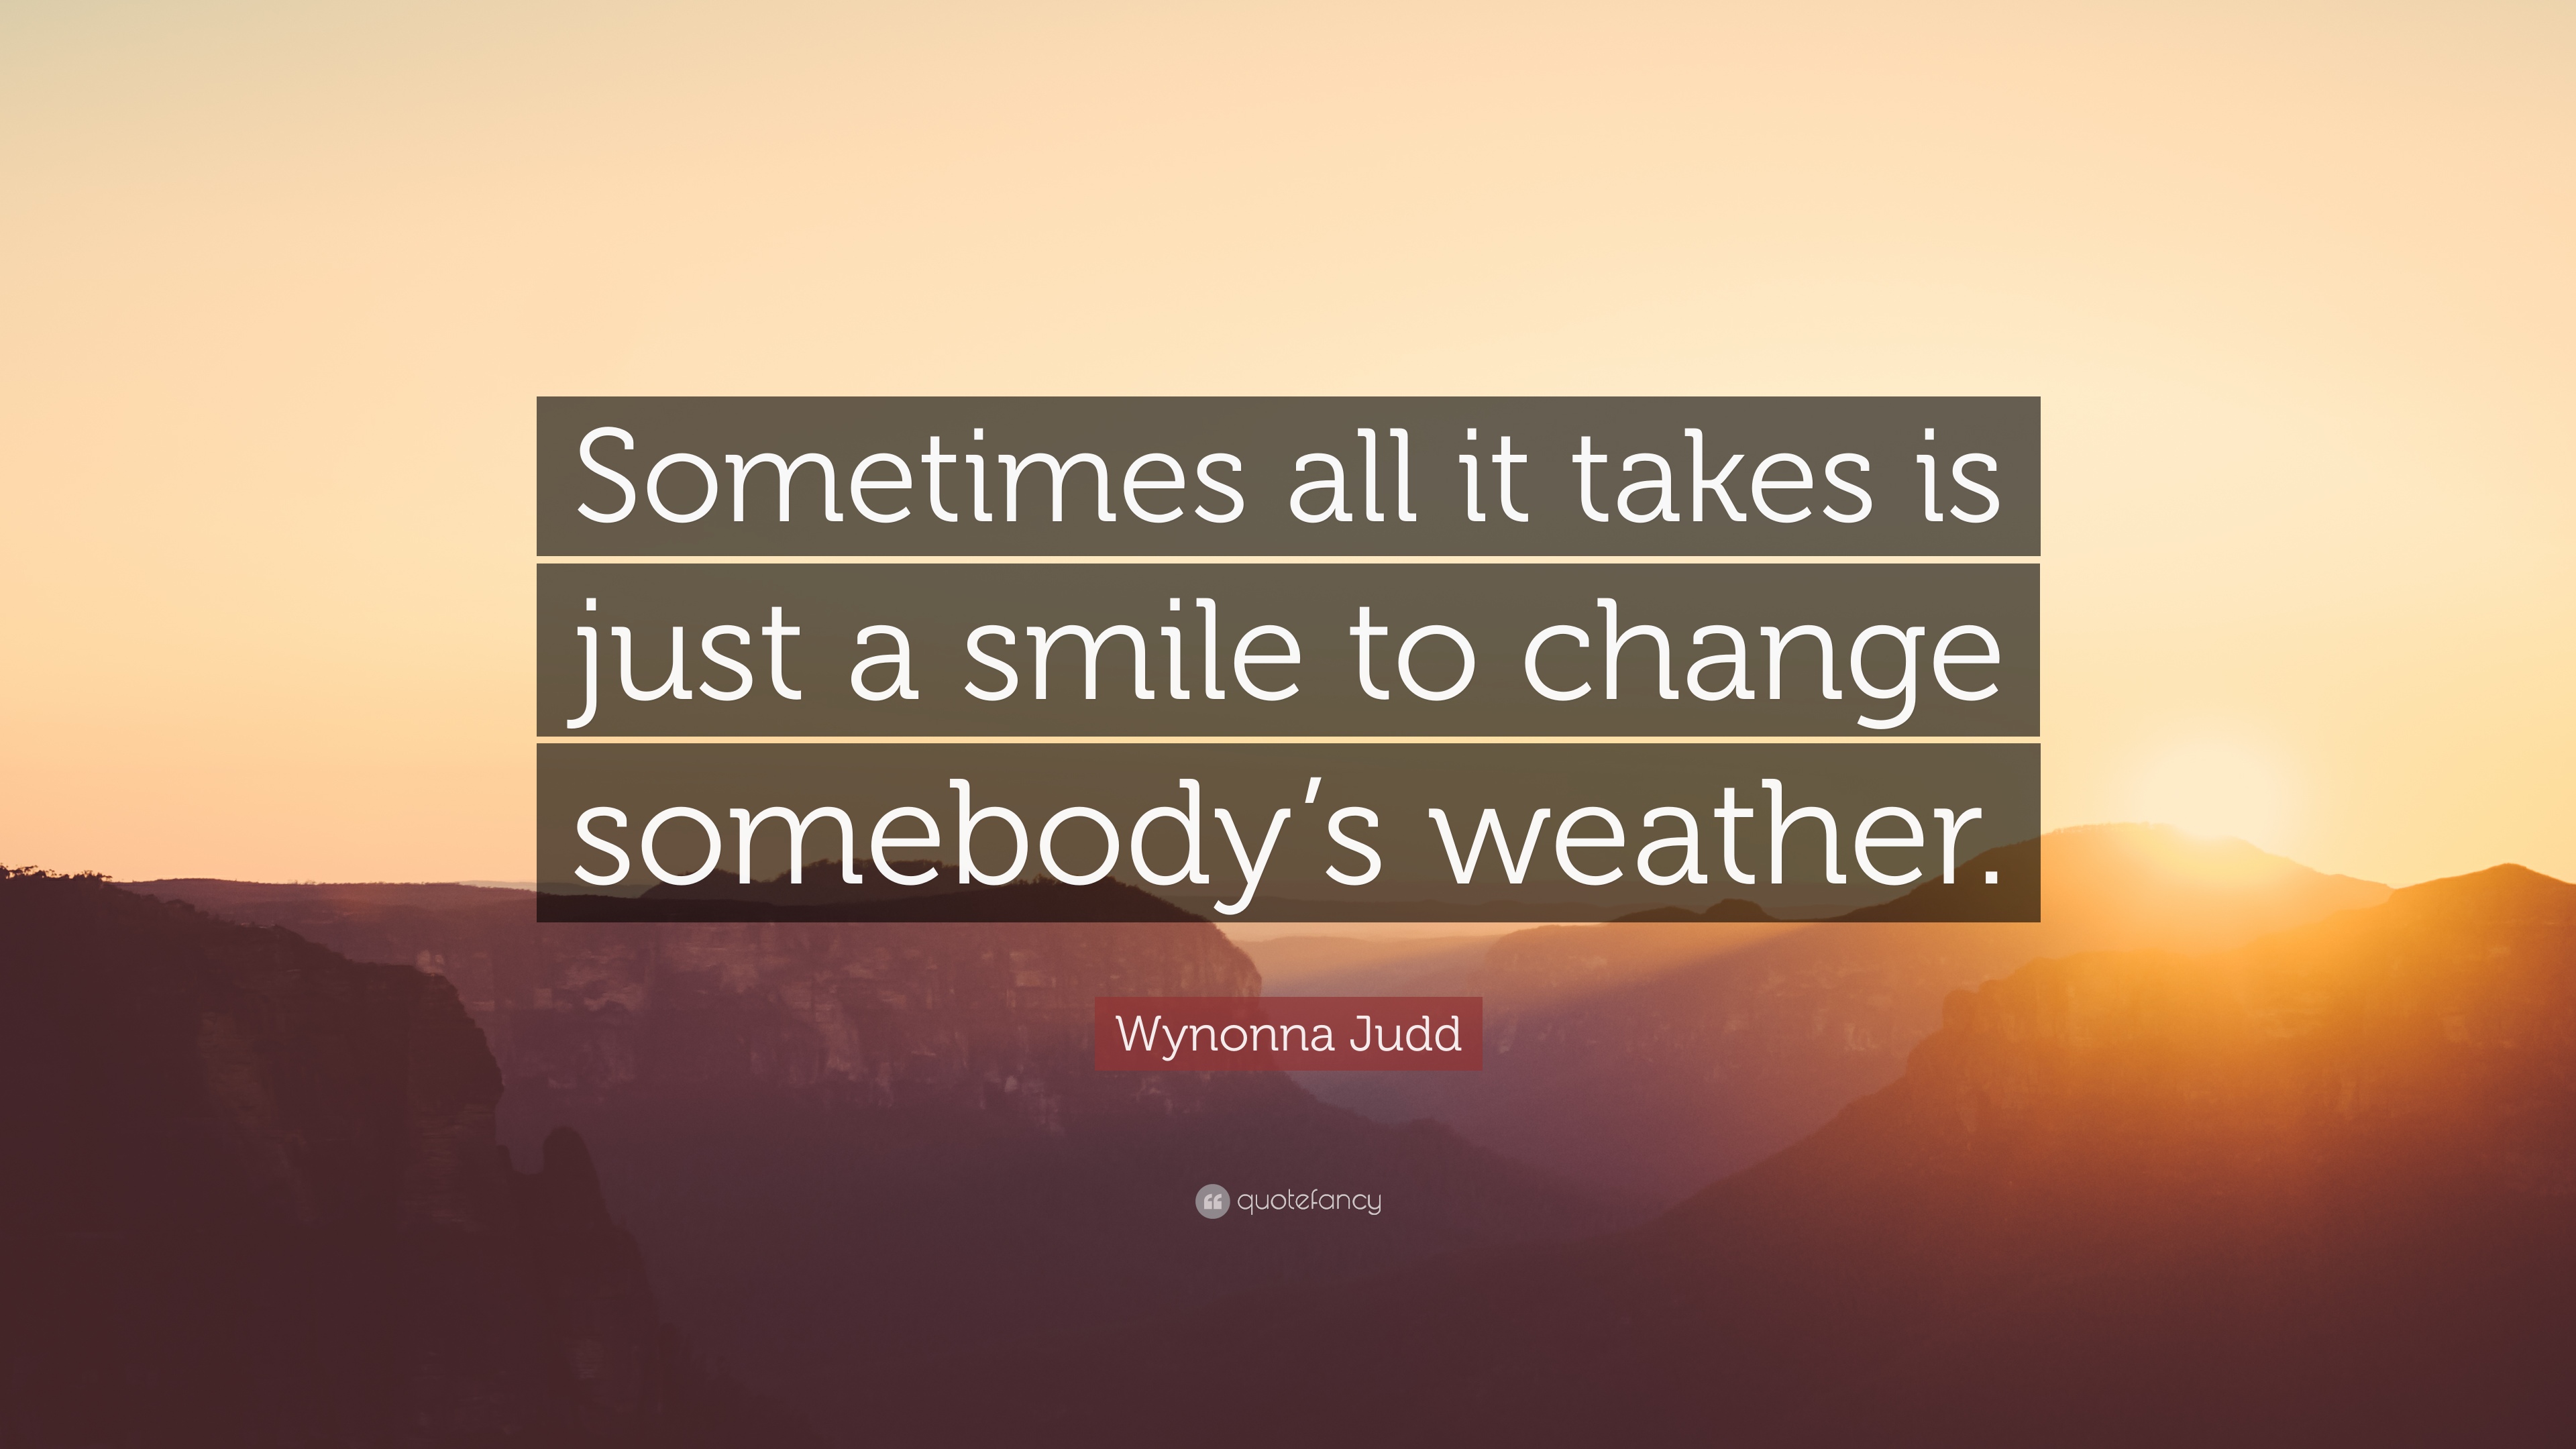 Wynonna Judd Quote: “Sometimes all it takes is just a smile to ...